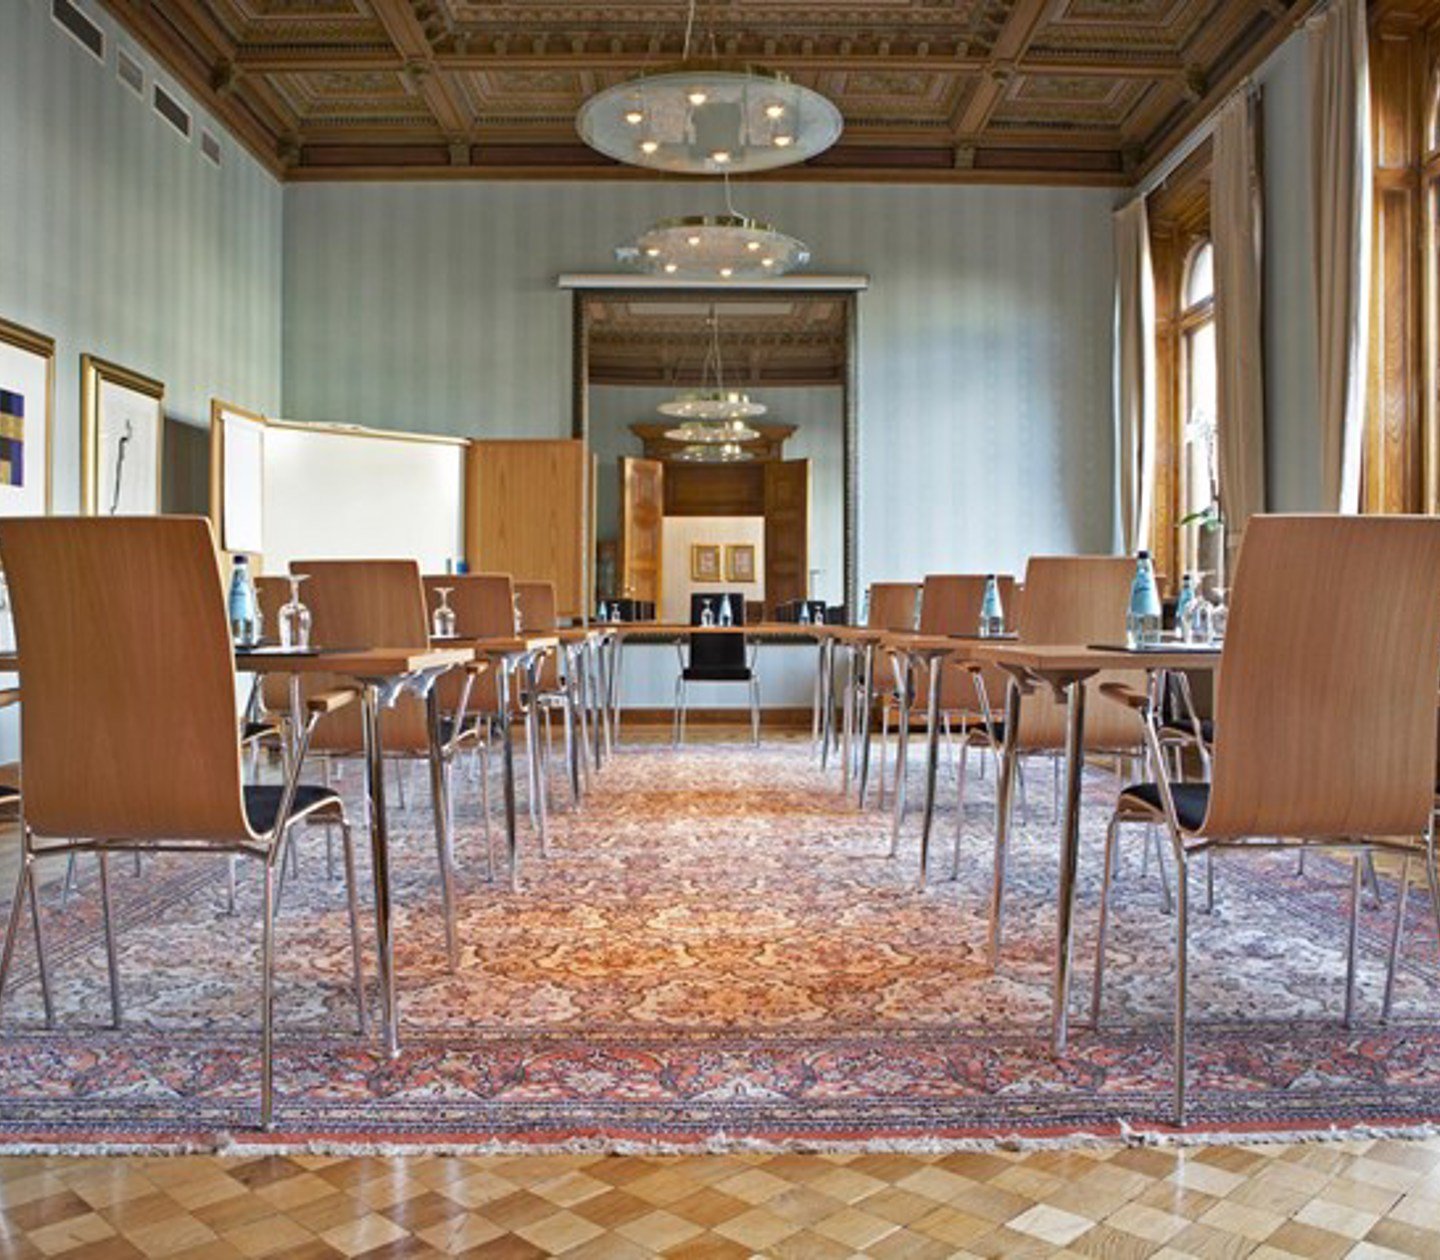 Conference room with many chairs